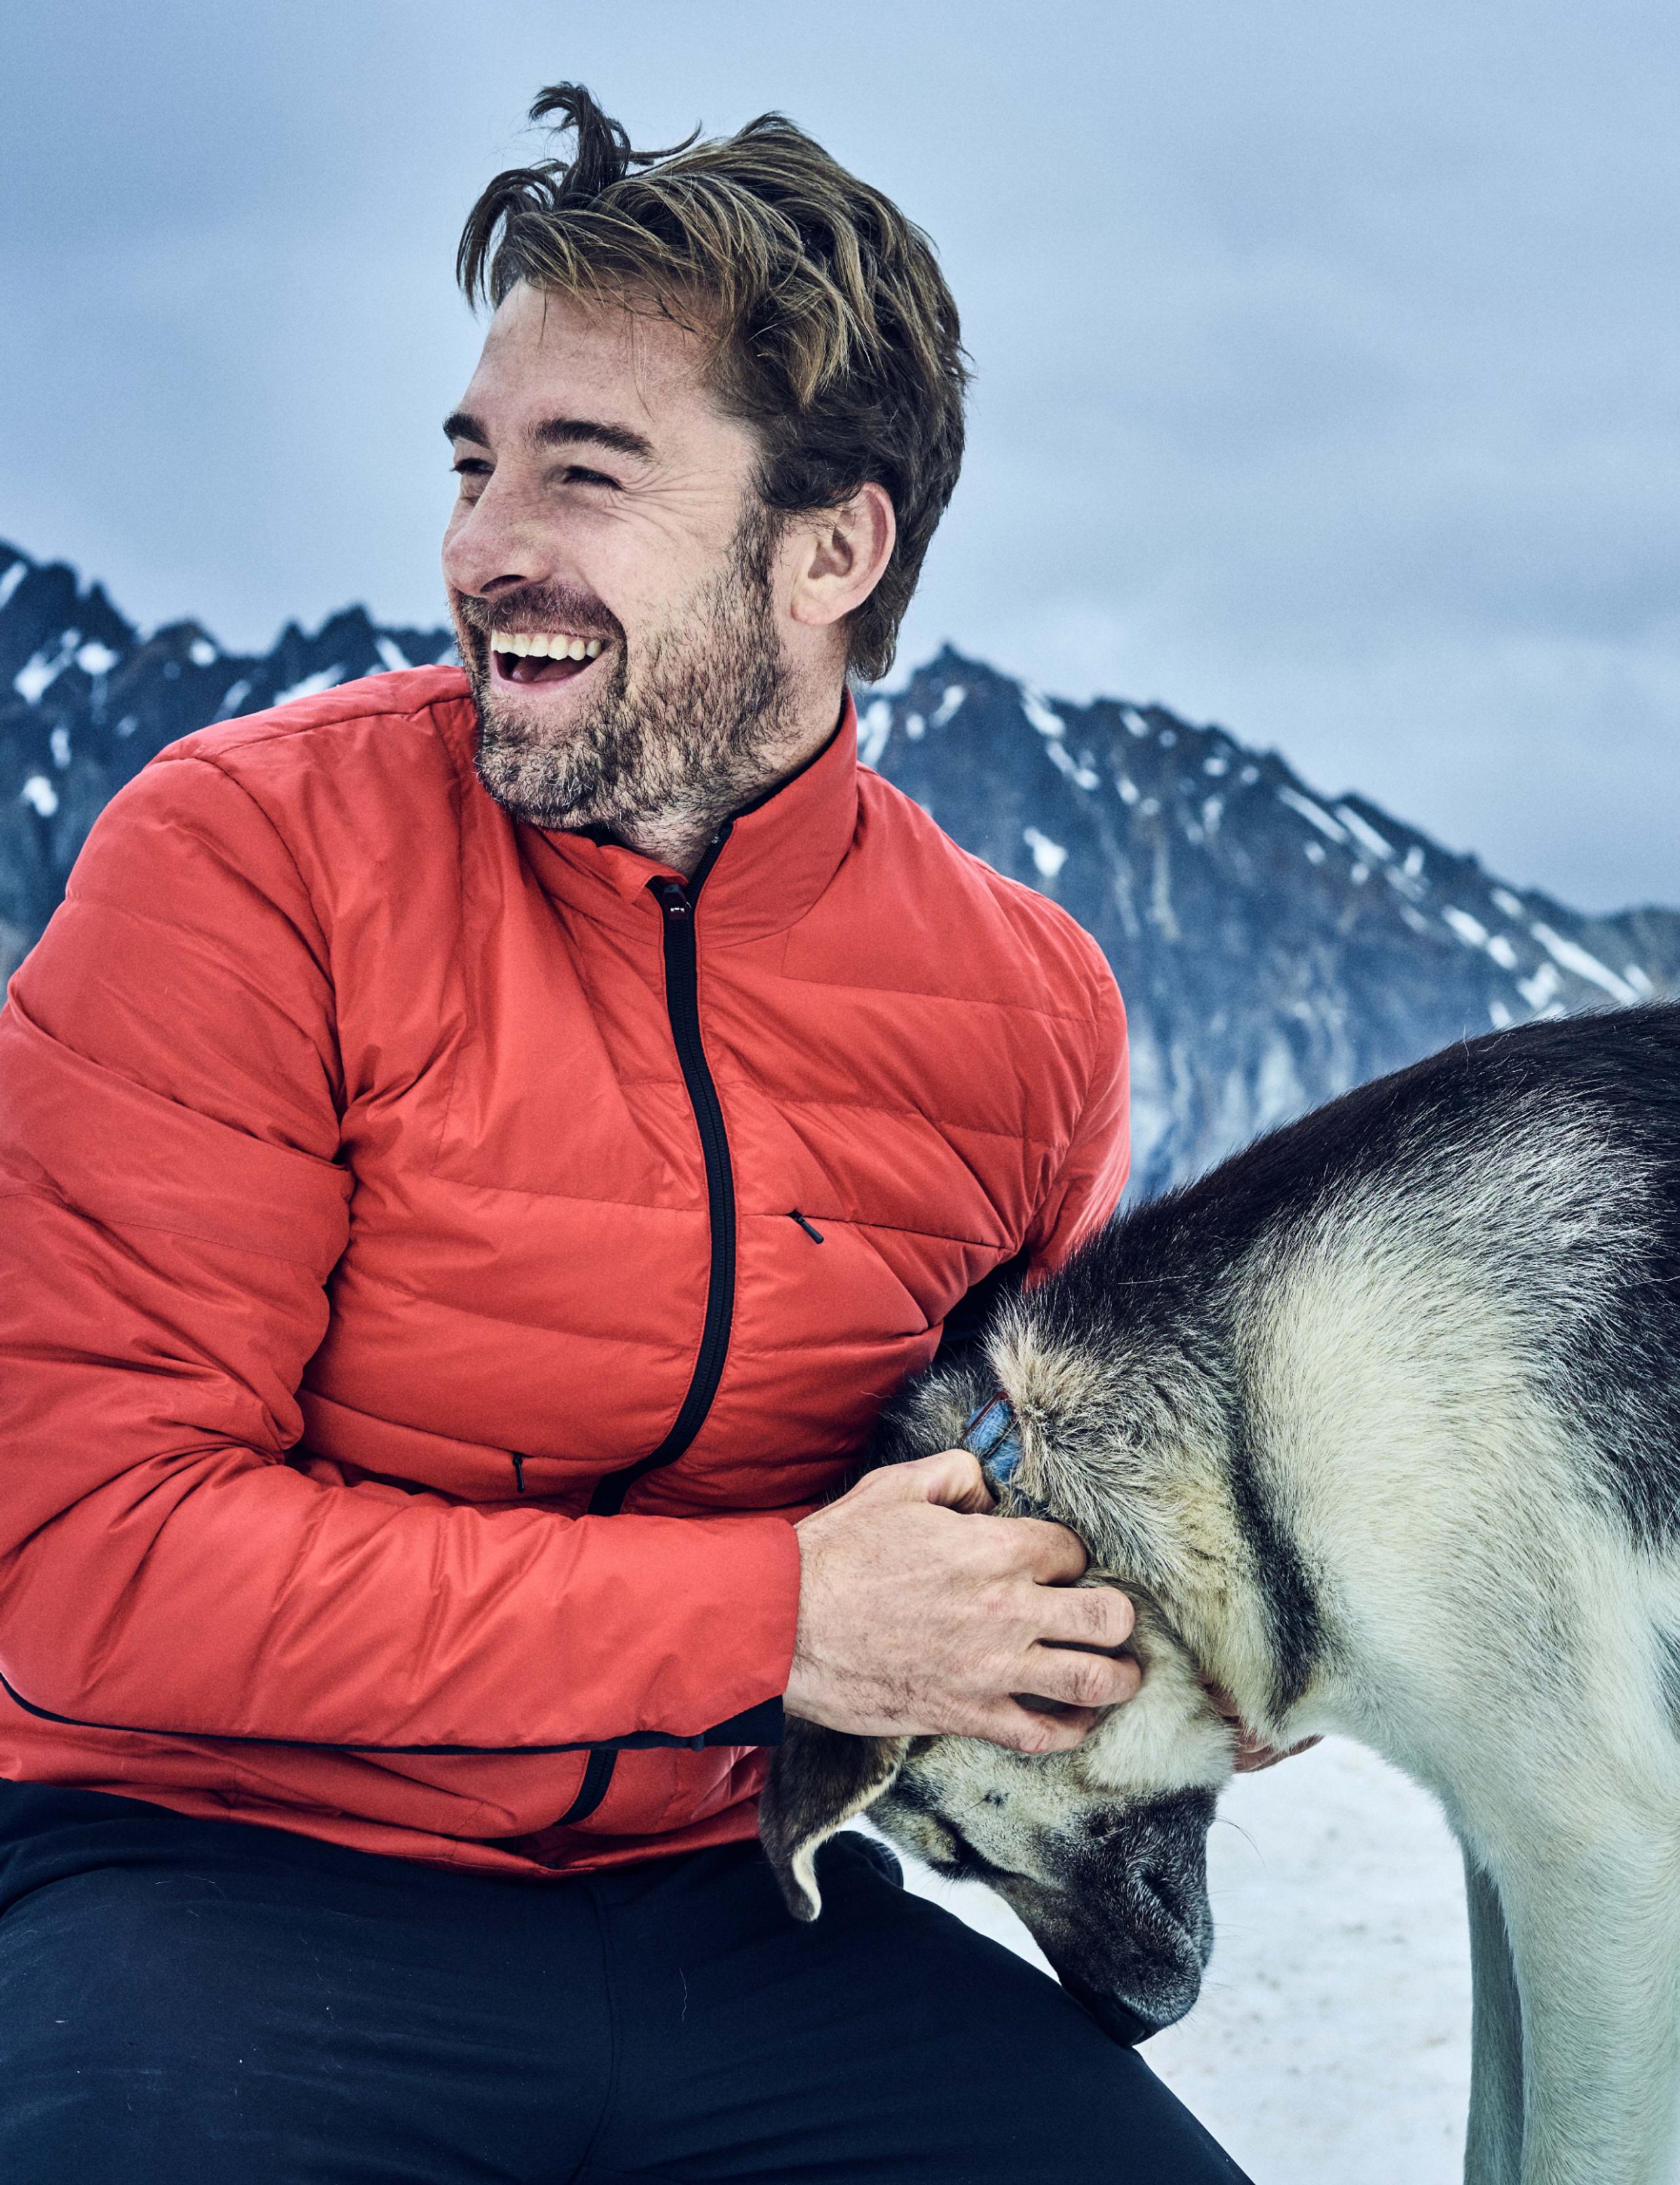 Man wearing red jacket smiling while scratching a dog on a glacier in Alaska